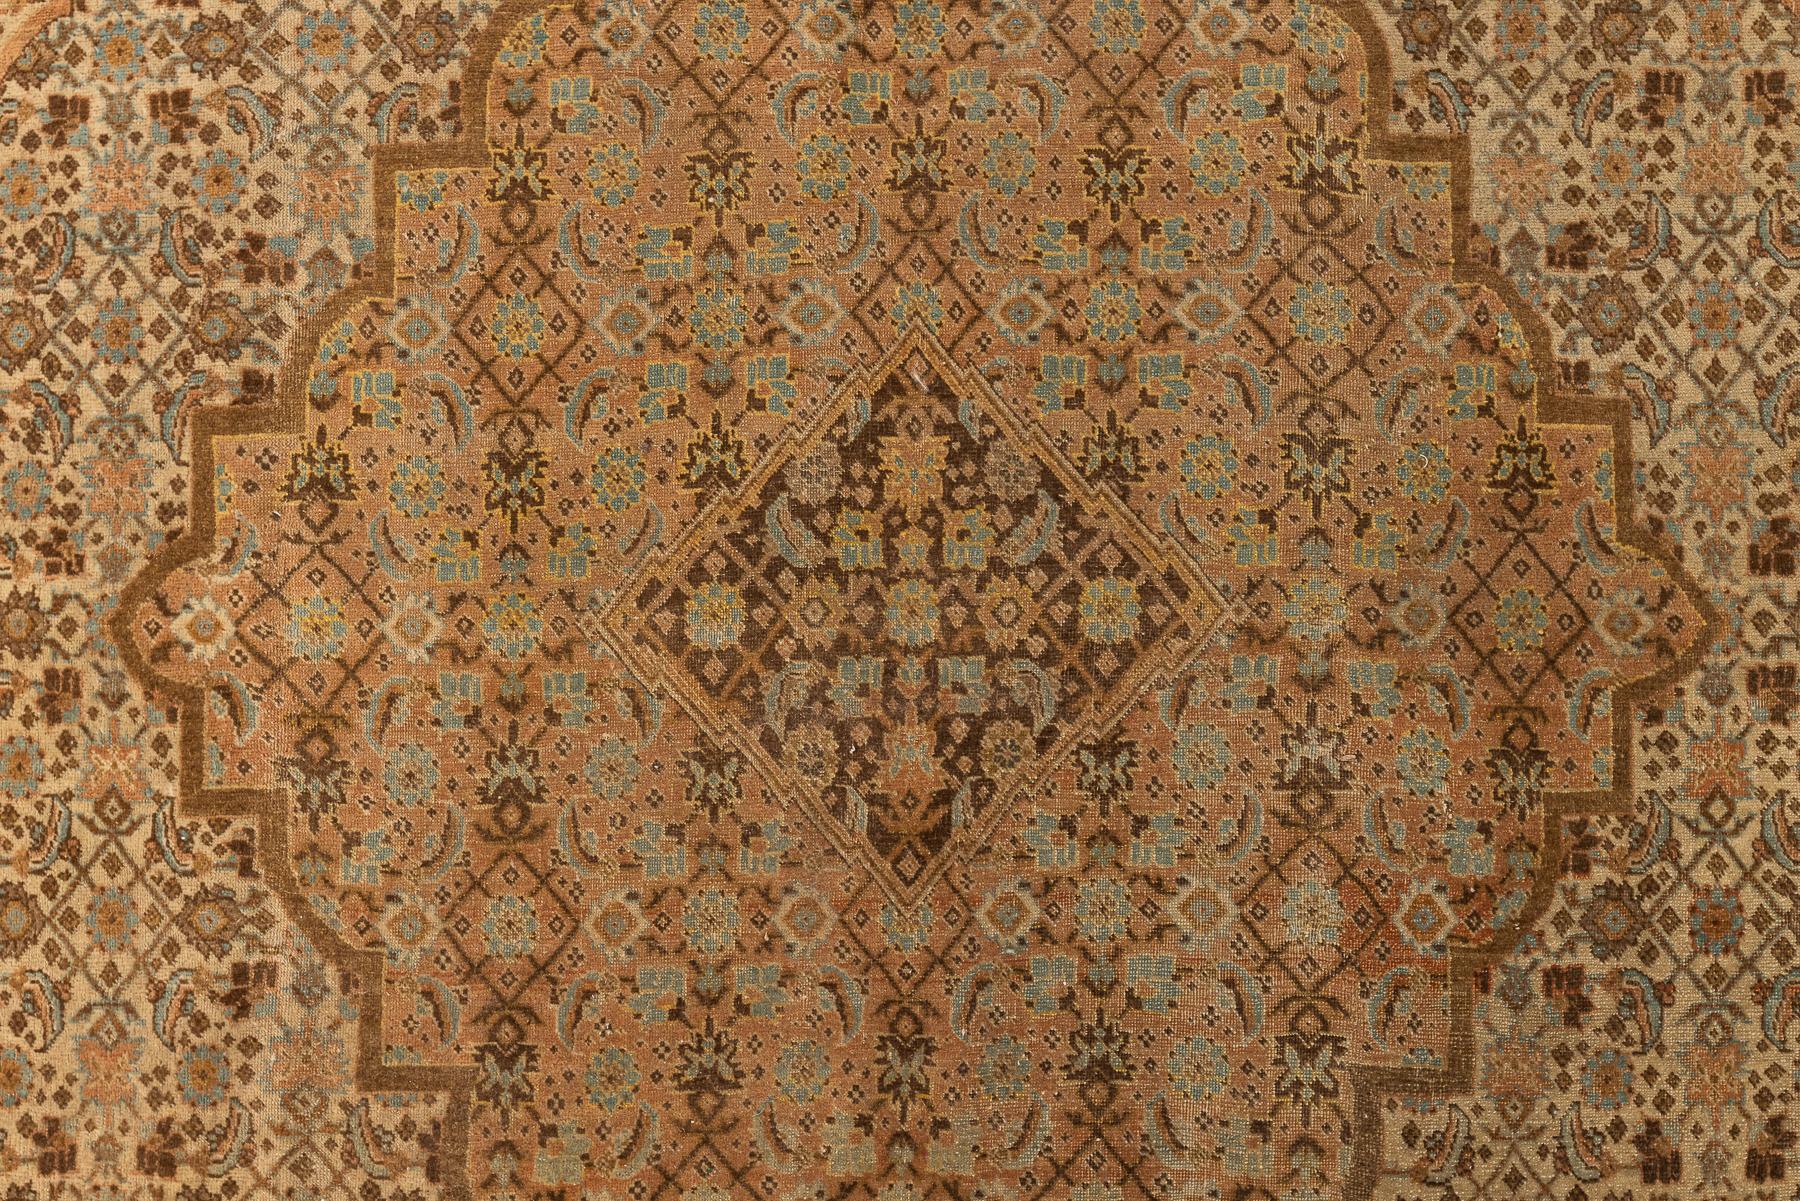 Tabriz – Northwest Persia

This is a Tabriz rug inspired by the master of arts Hadji Jallili. Its design emphasizes subtle gradations of colour hue and precise, detailed work. Rather than the predominant medallion most commonly seen in Persian rugs,